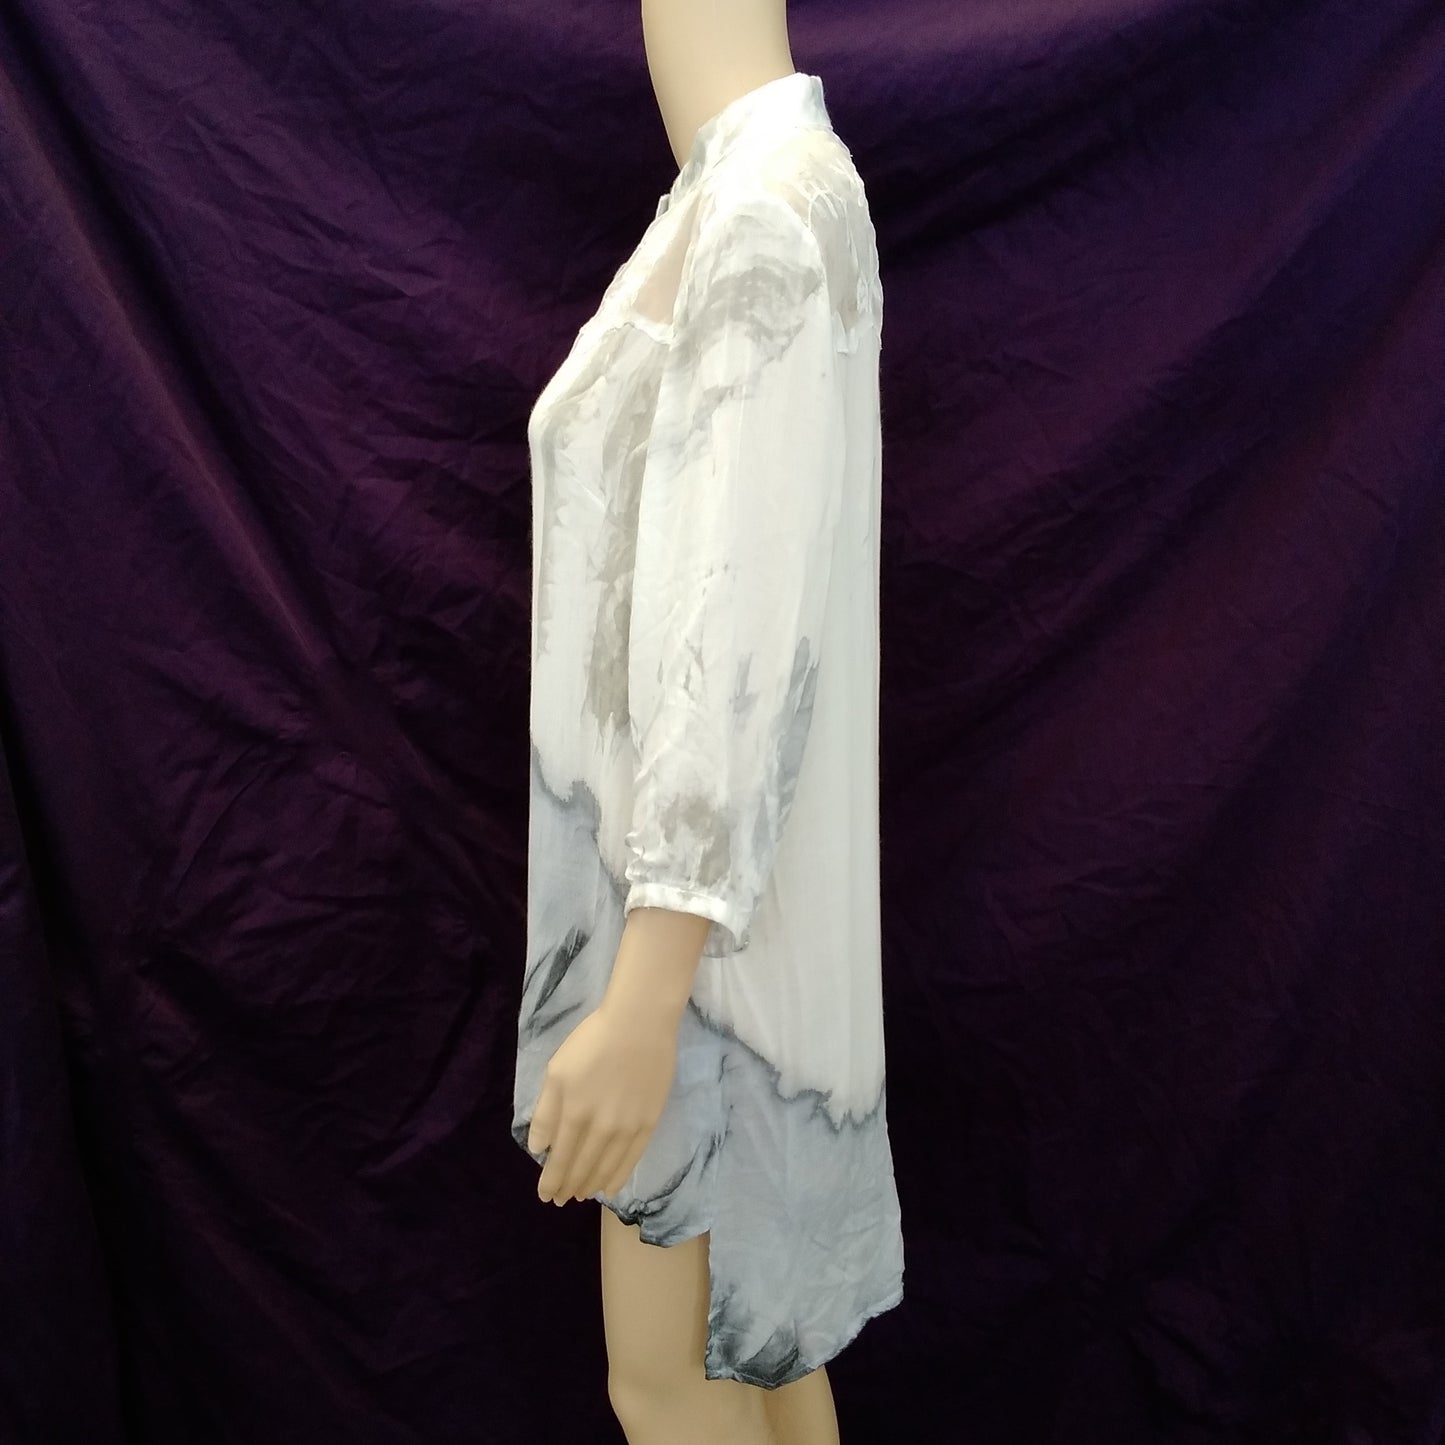 NWT - Belle France Women's White and Gray 3/4 Sleeve Blouse - Size: L